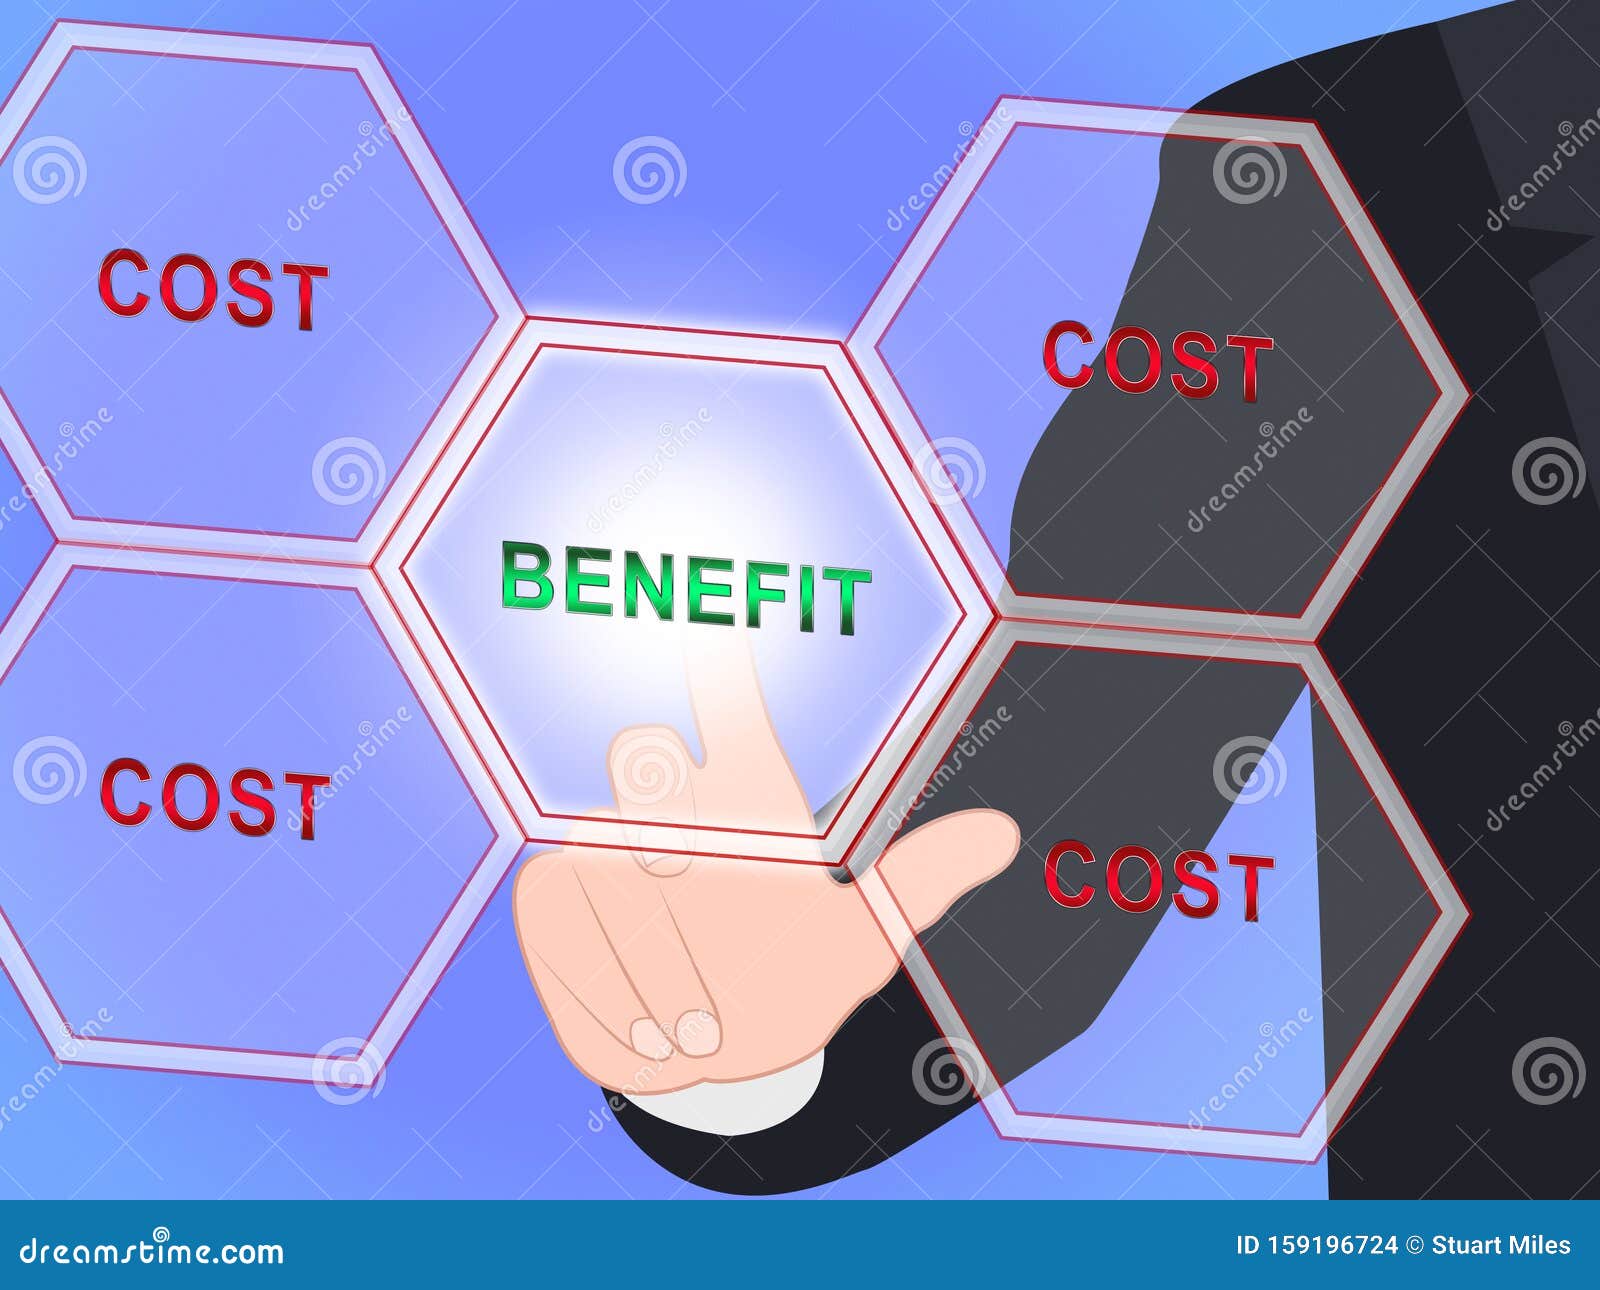 benefit versus cost button means value gained over money spent - 3d 